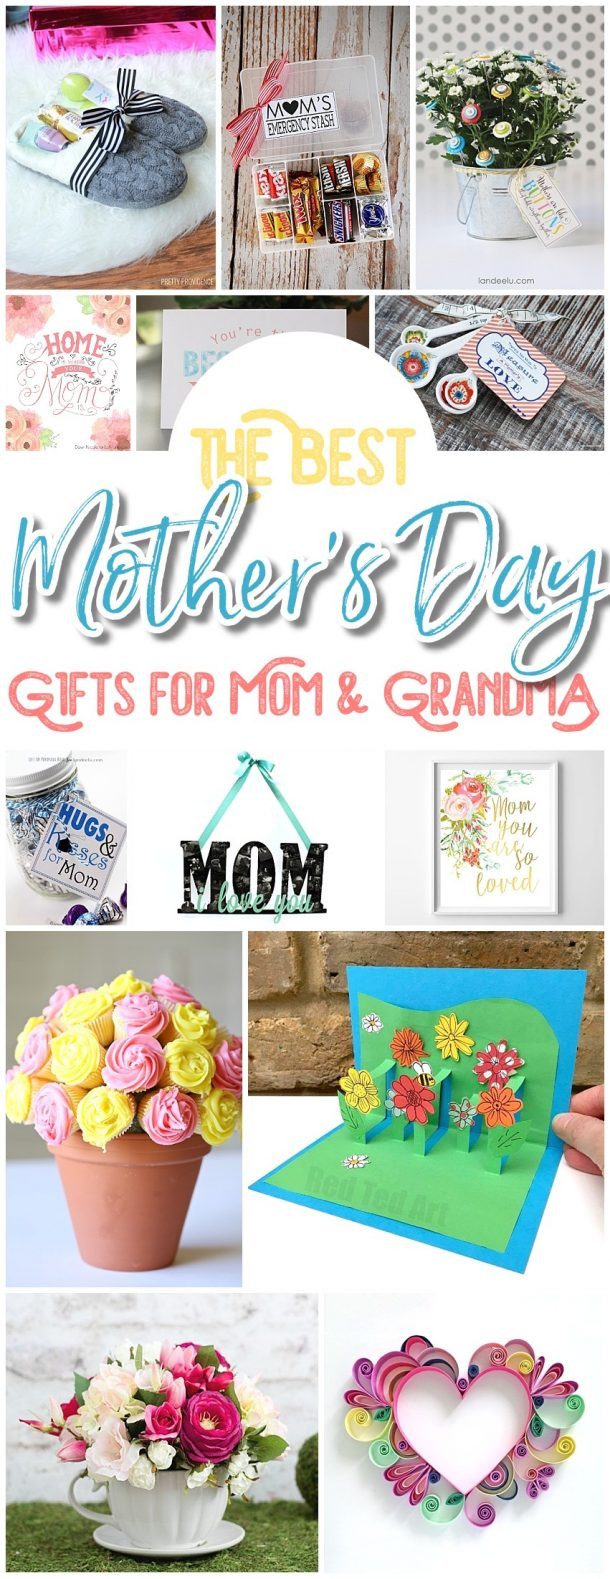 Mothers Day Gift Ideas 2017
 The BEST Easy DIY Mother’s Day Gifts and Treats Ideas